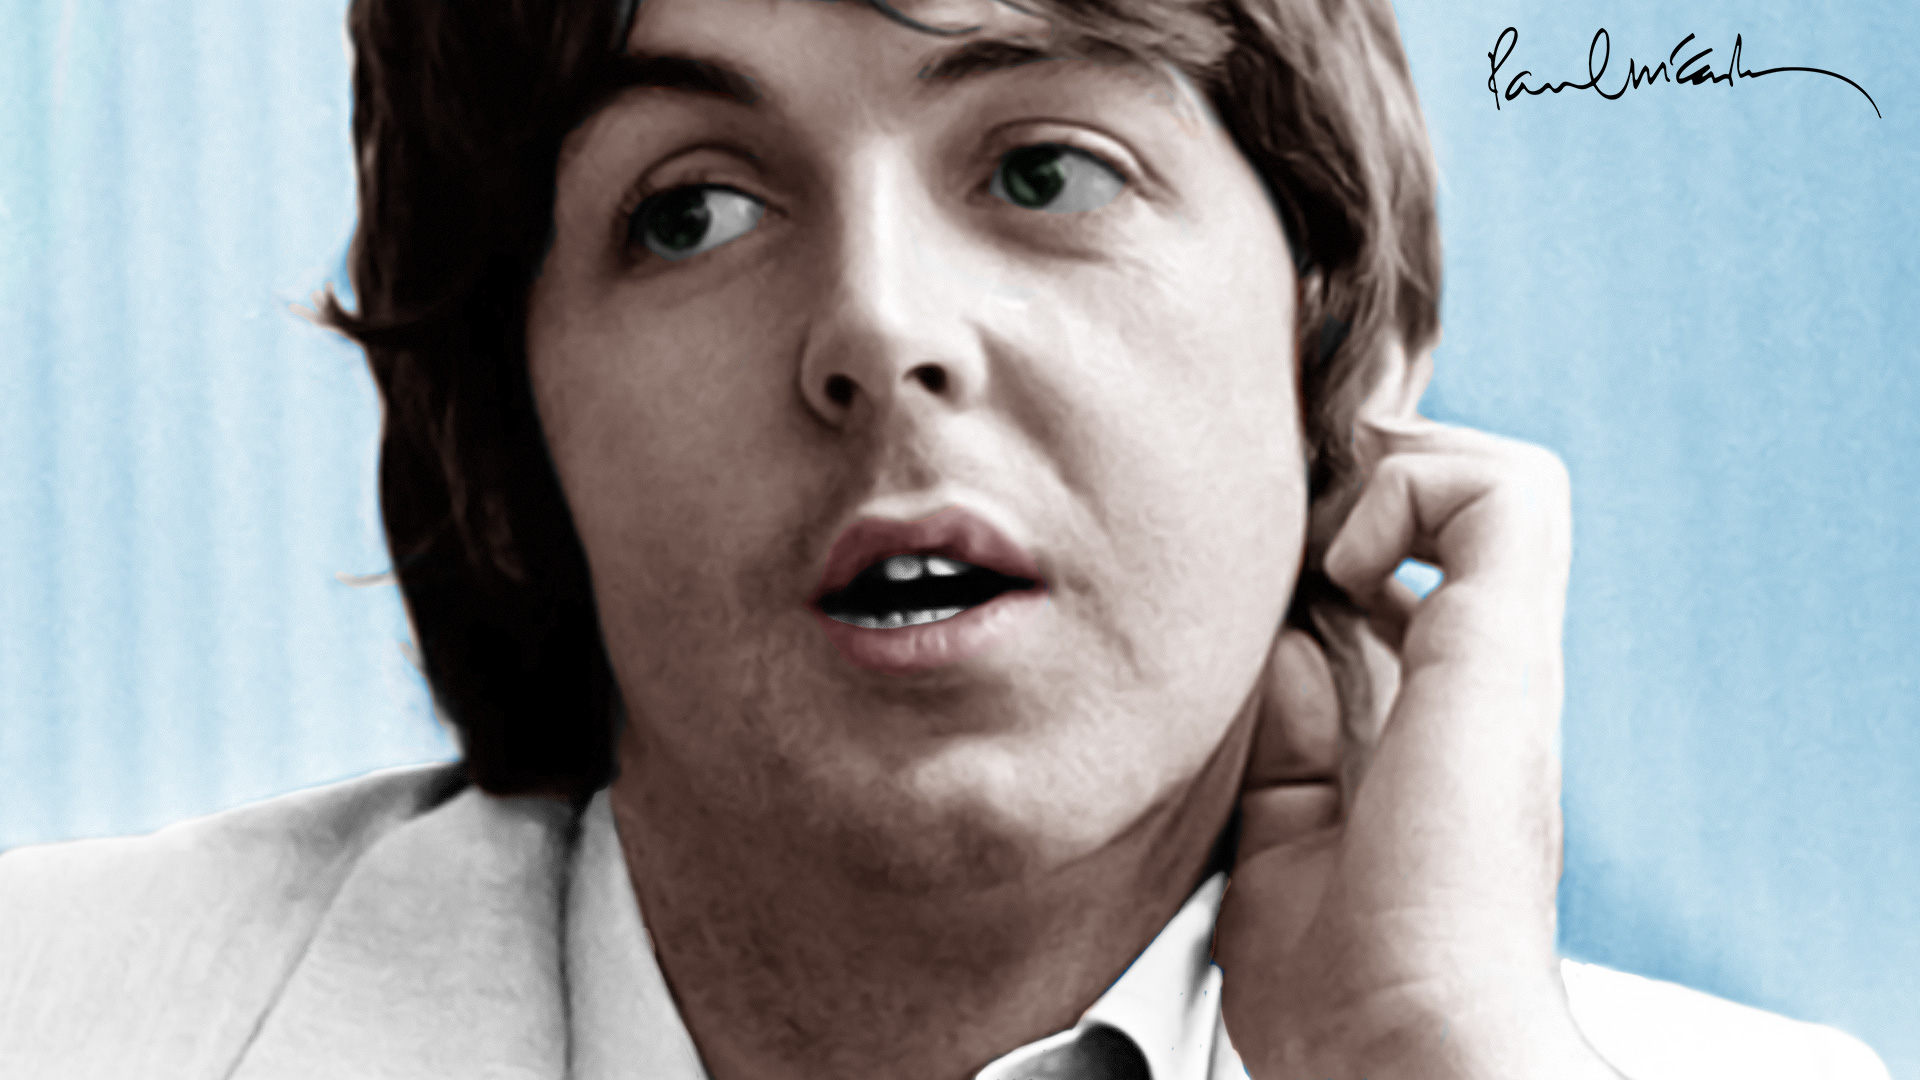 View And Download Paul McCartney HD Wallpapers ...